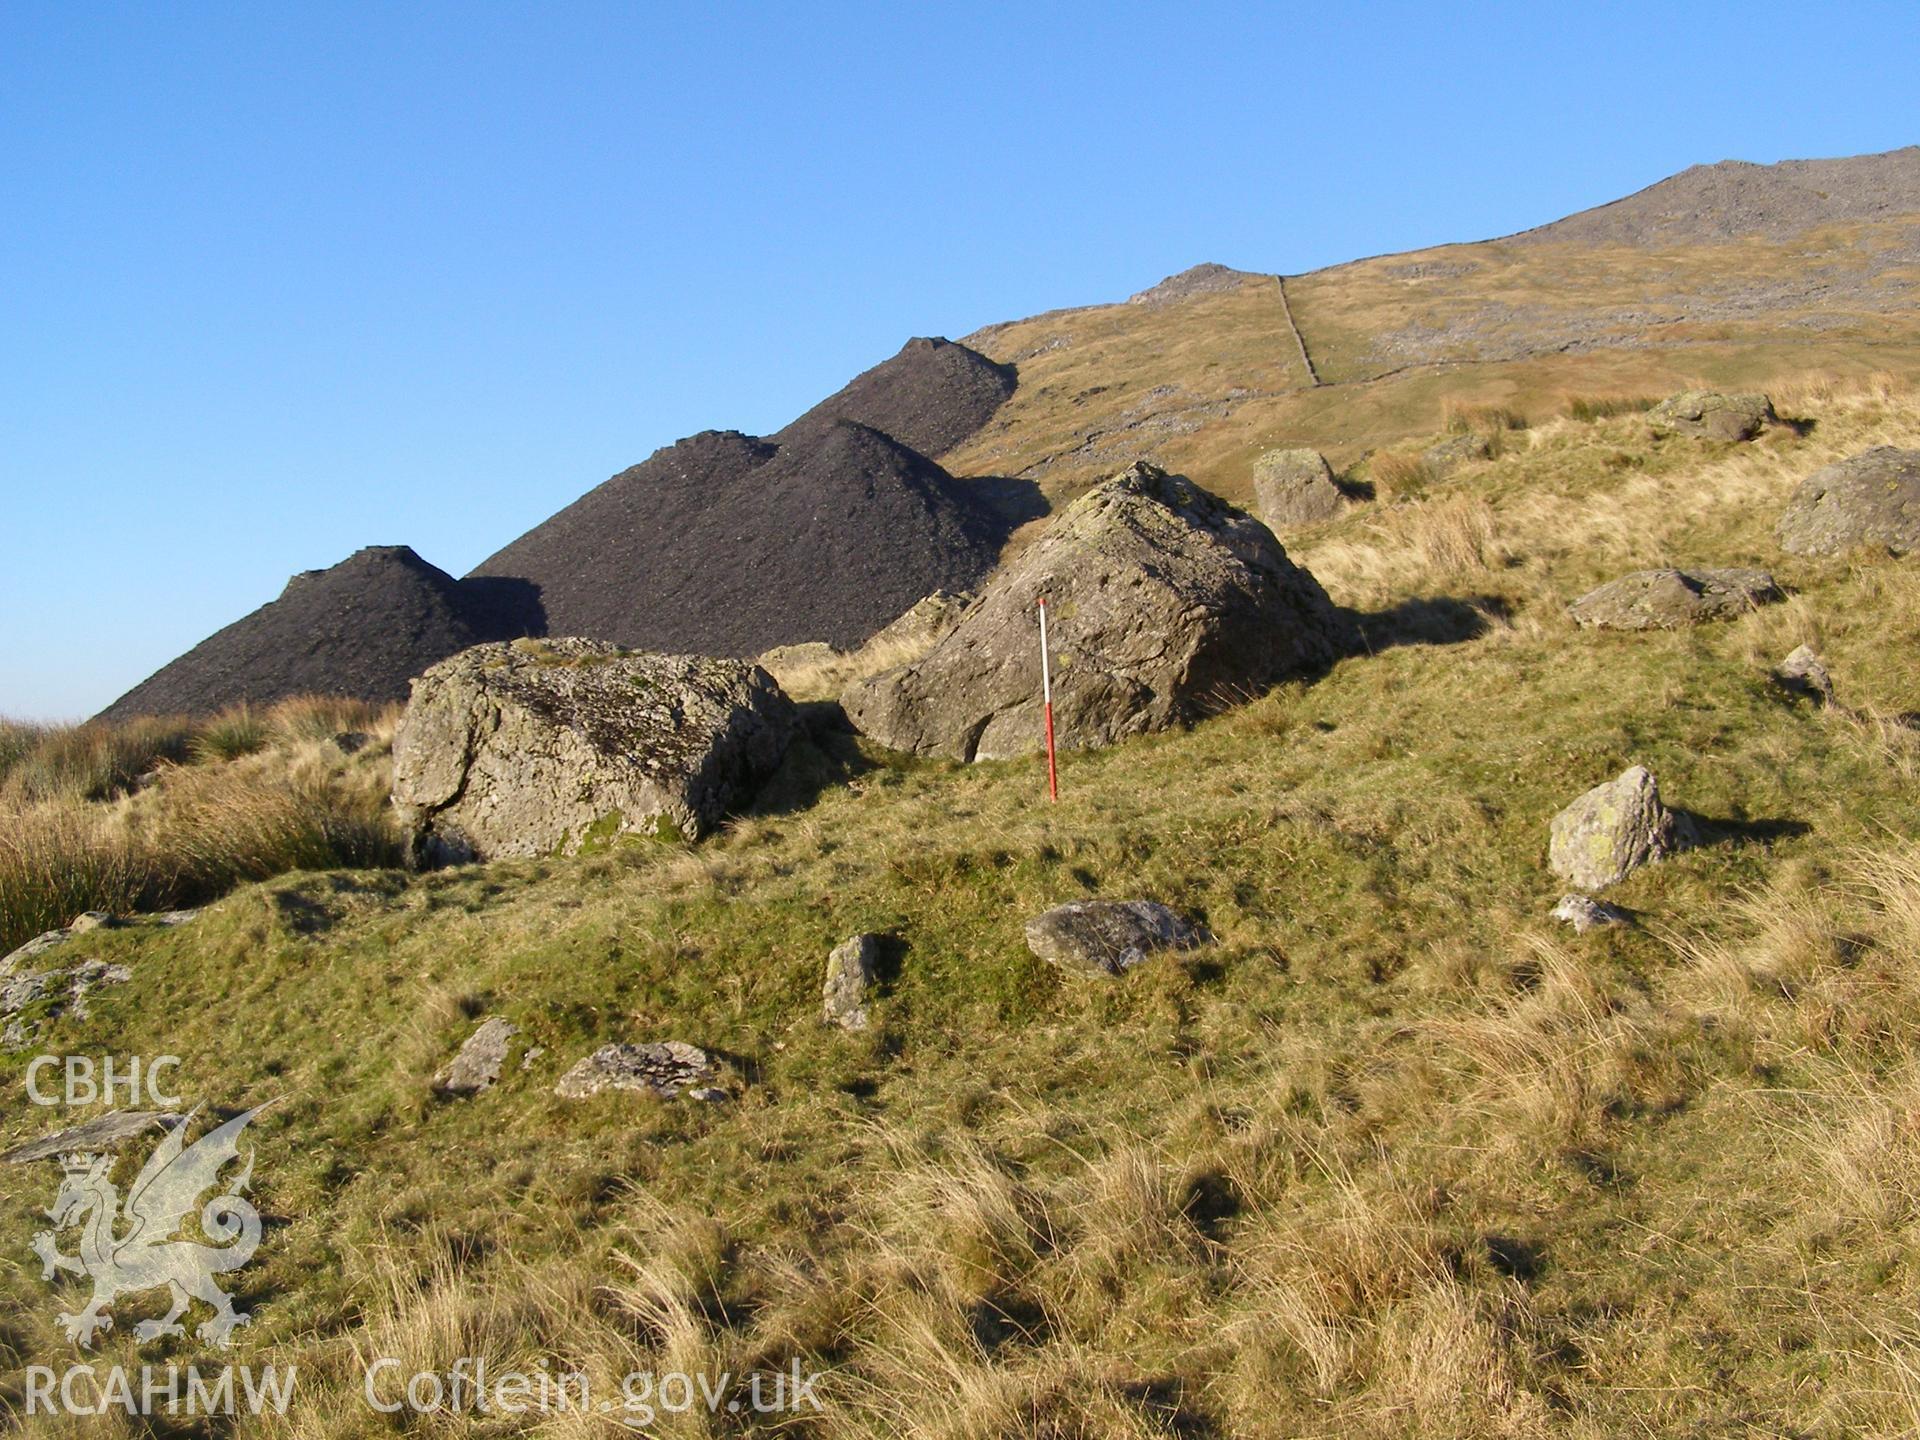 Digital colour photograph of Afon Gafr earthwork taken on 19/12/2007 by P.J. Schofield during the Snowdonia Bethesda Upland Survey undertaken by Oxford Archaeology North.